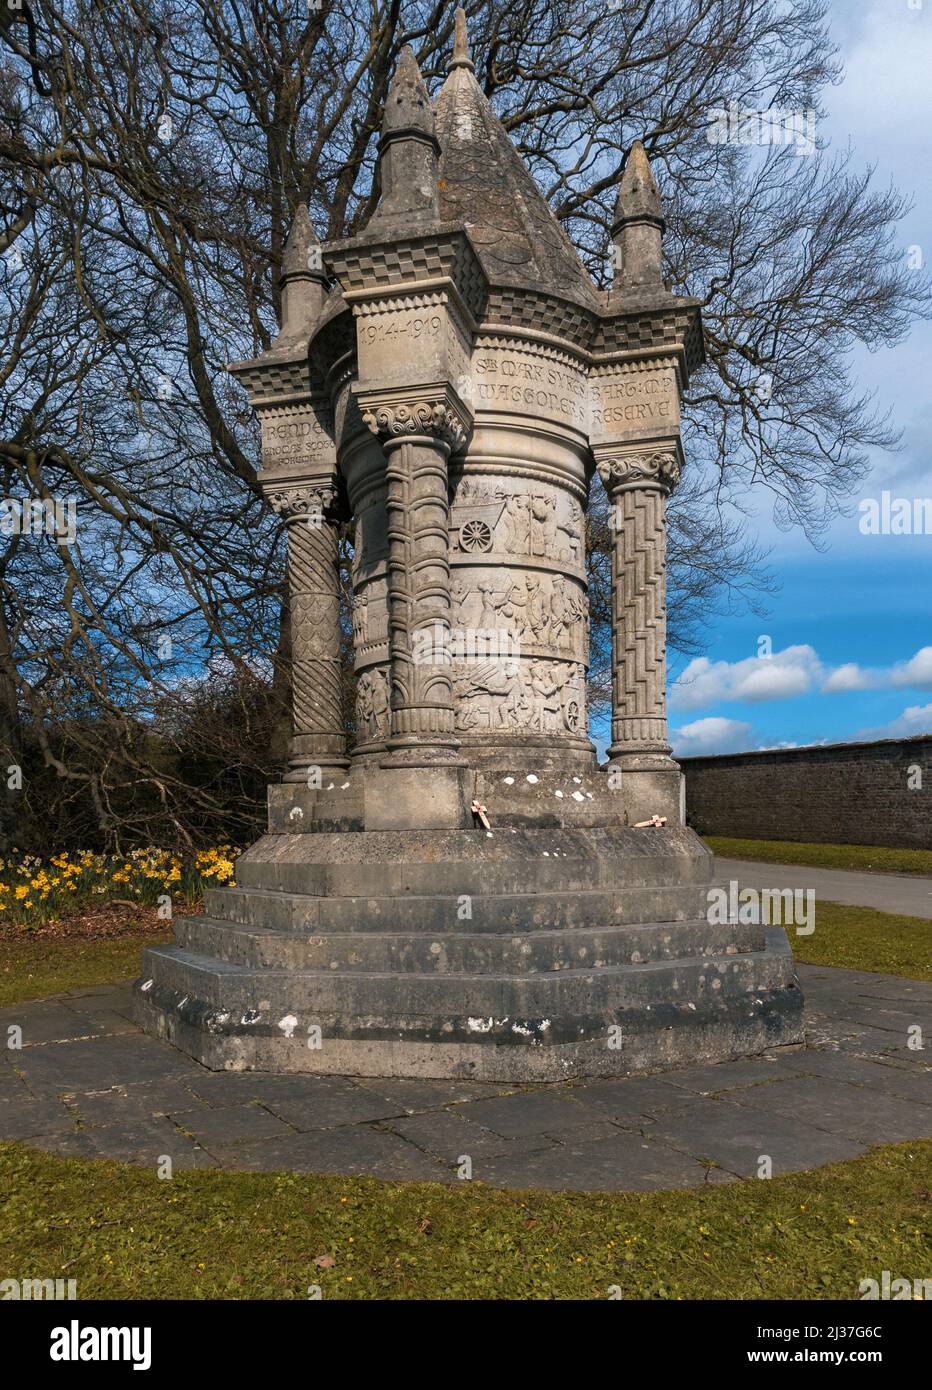 The Wagoners' Memorial is a war memorial in Sledmere, Stock Photo